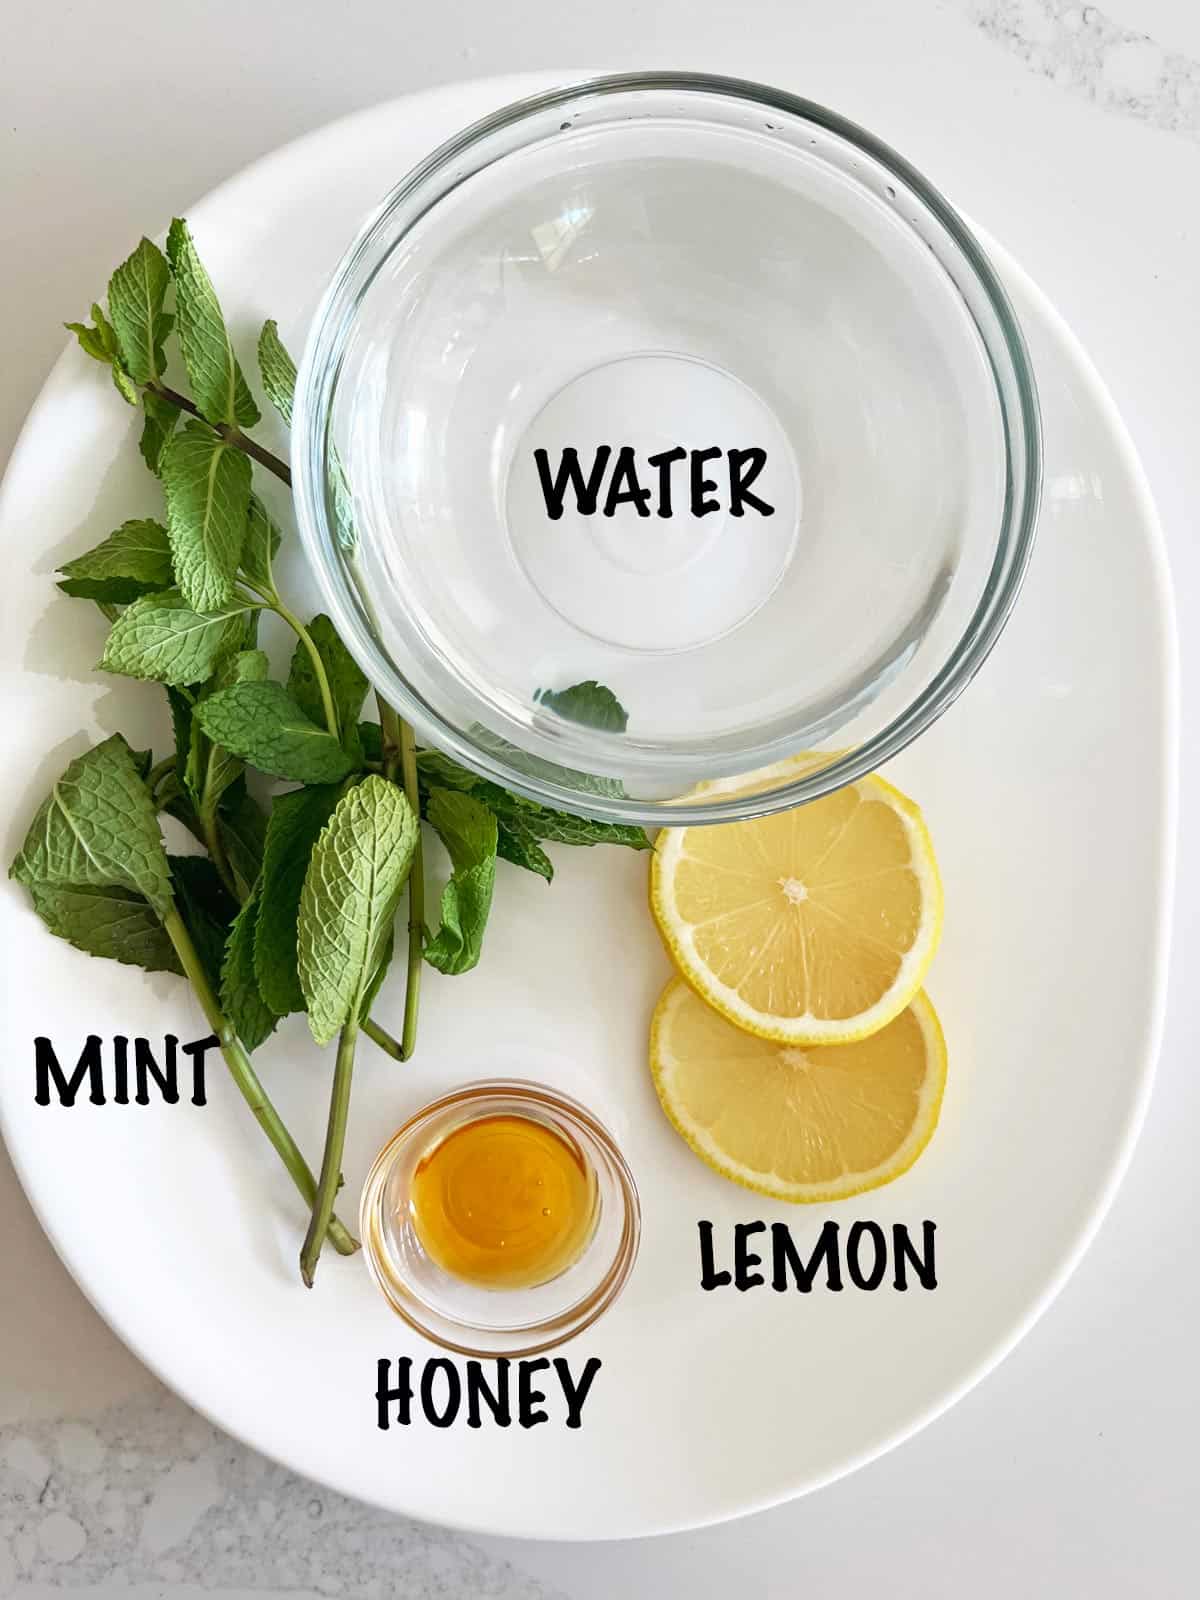 The ingredients needed for mint tea.